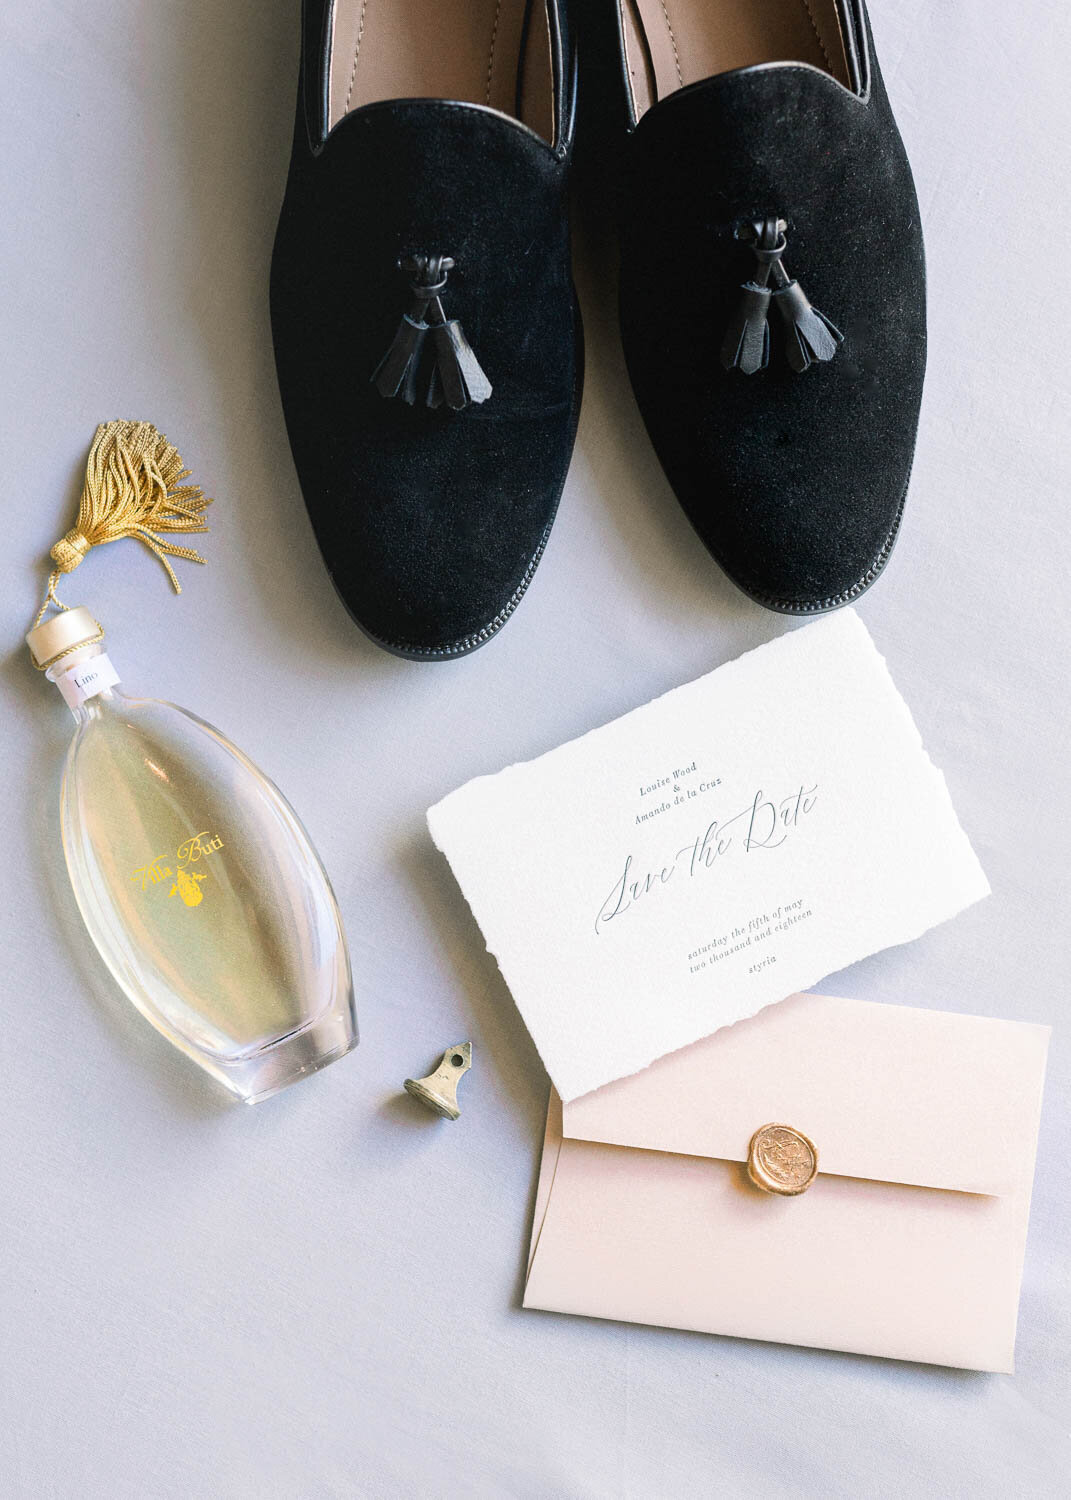 groom's details such as shoes and parfum